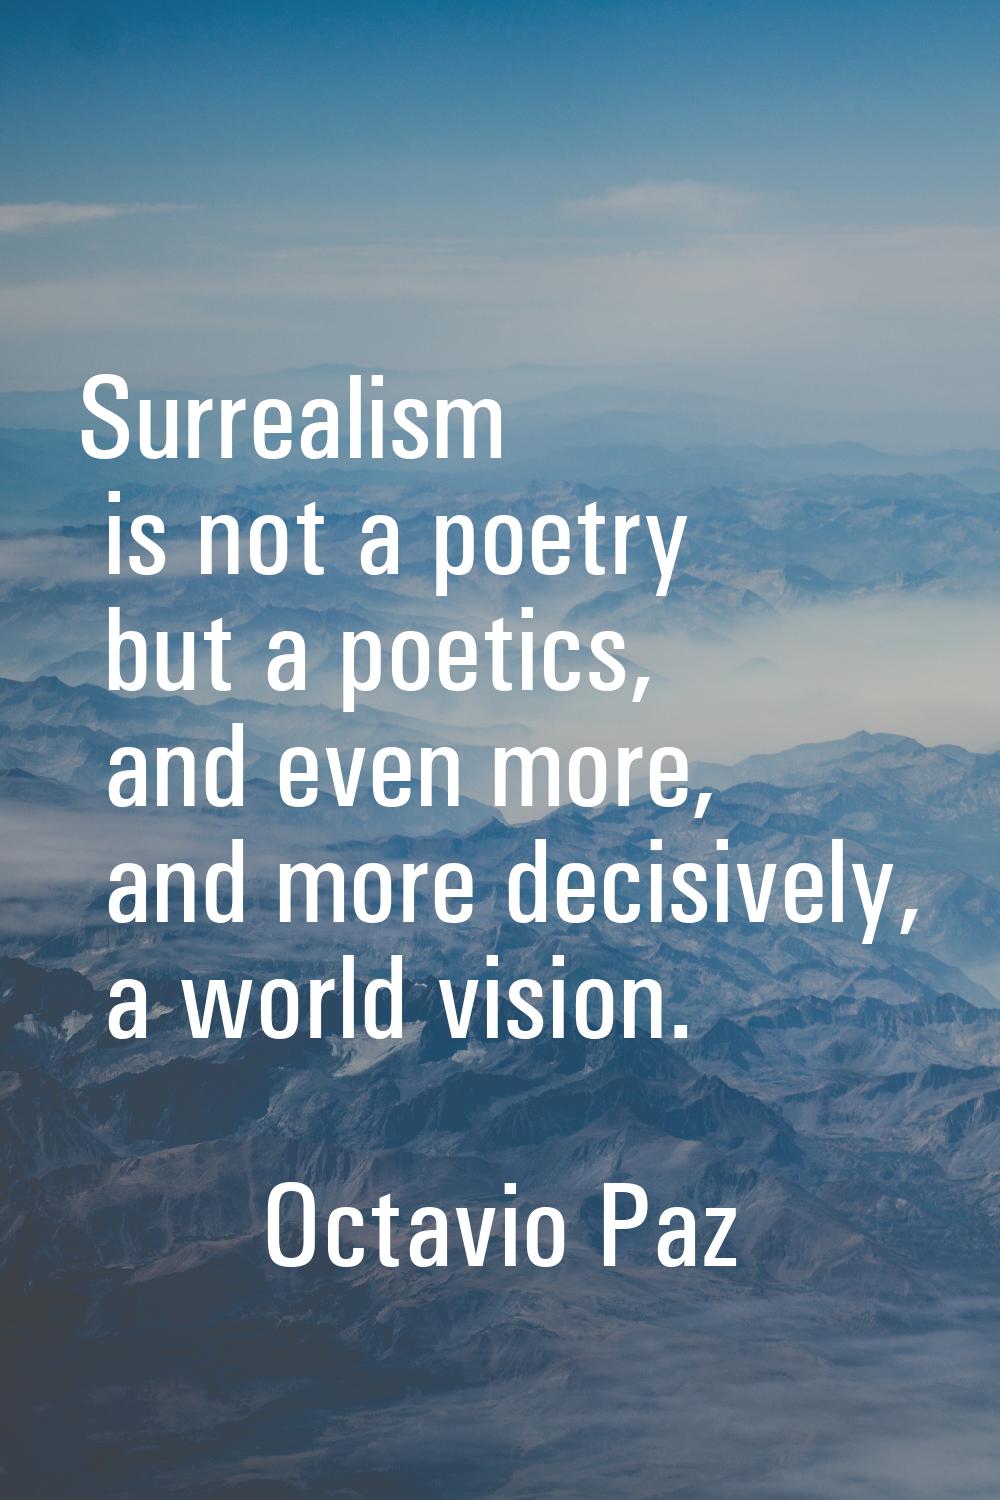 Surrealism is not a poetry but a poetics, and even more, and more decisively, a world vision.